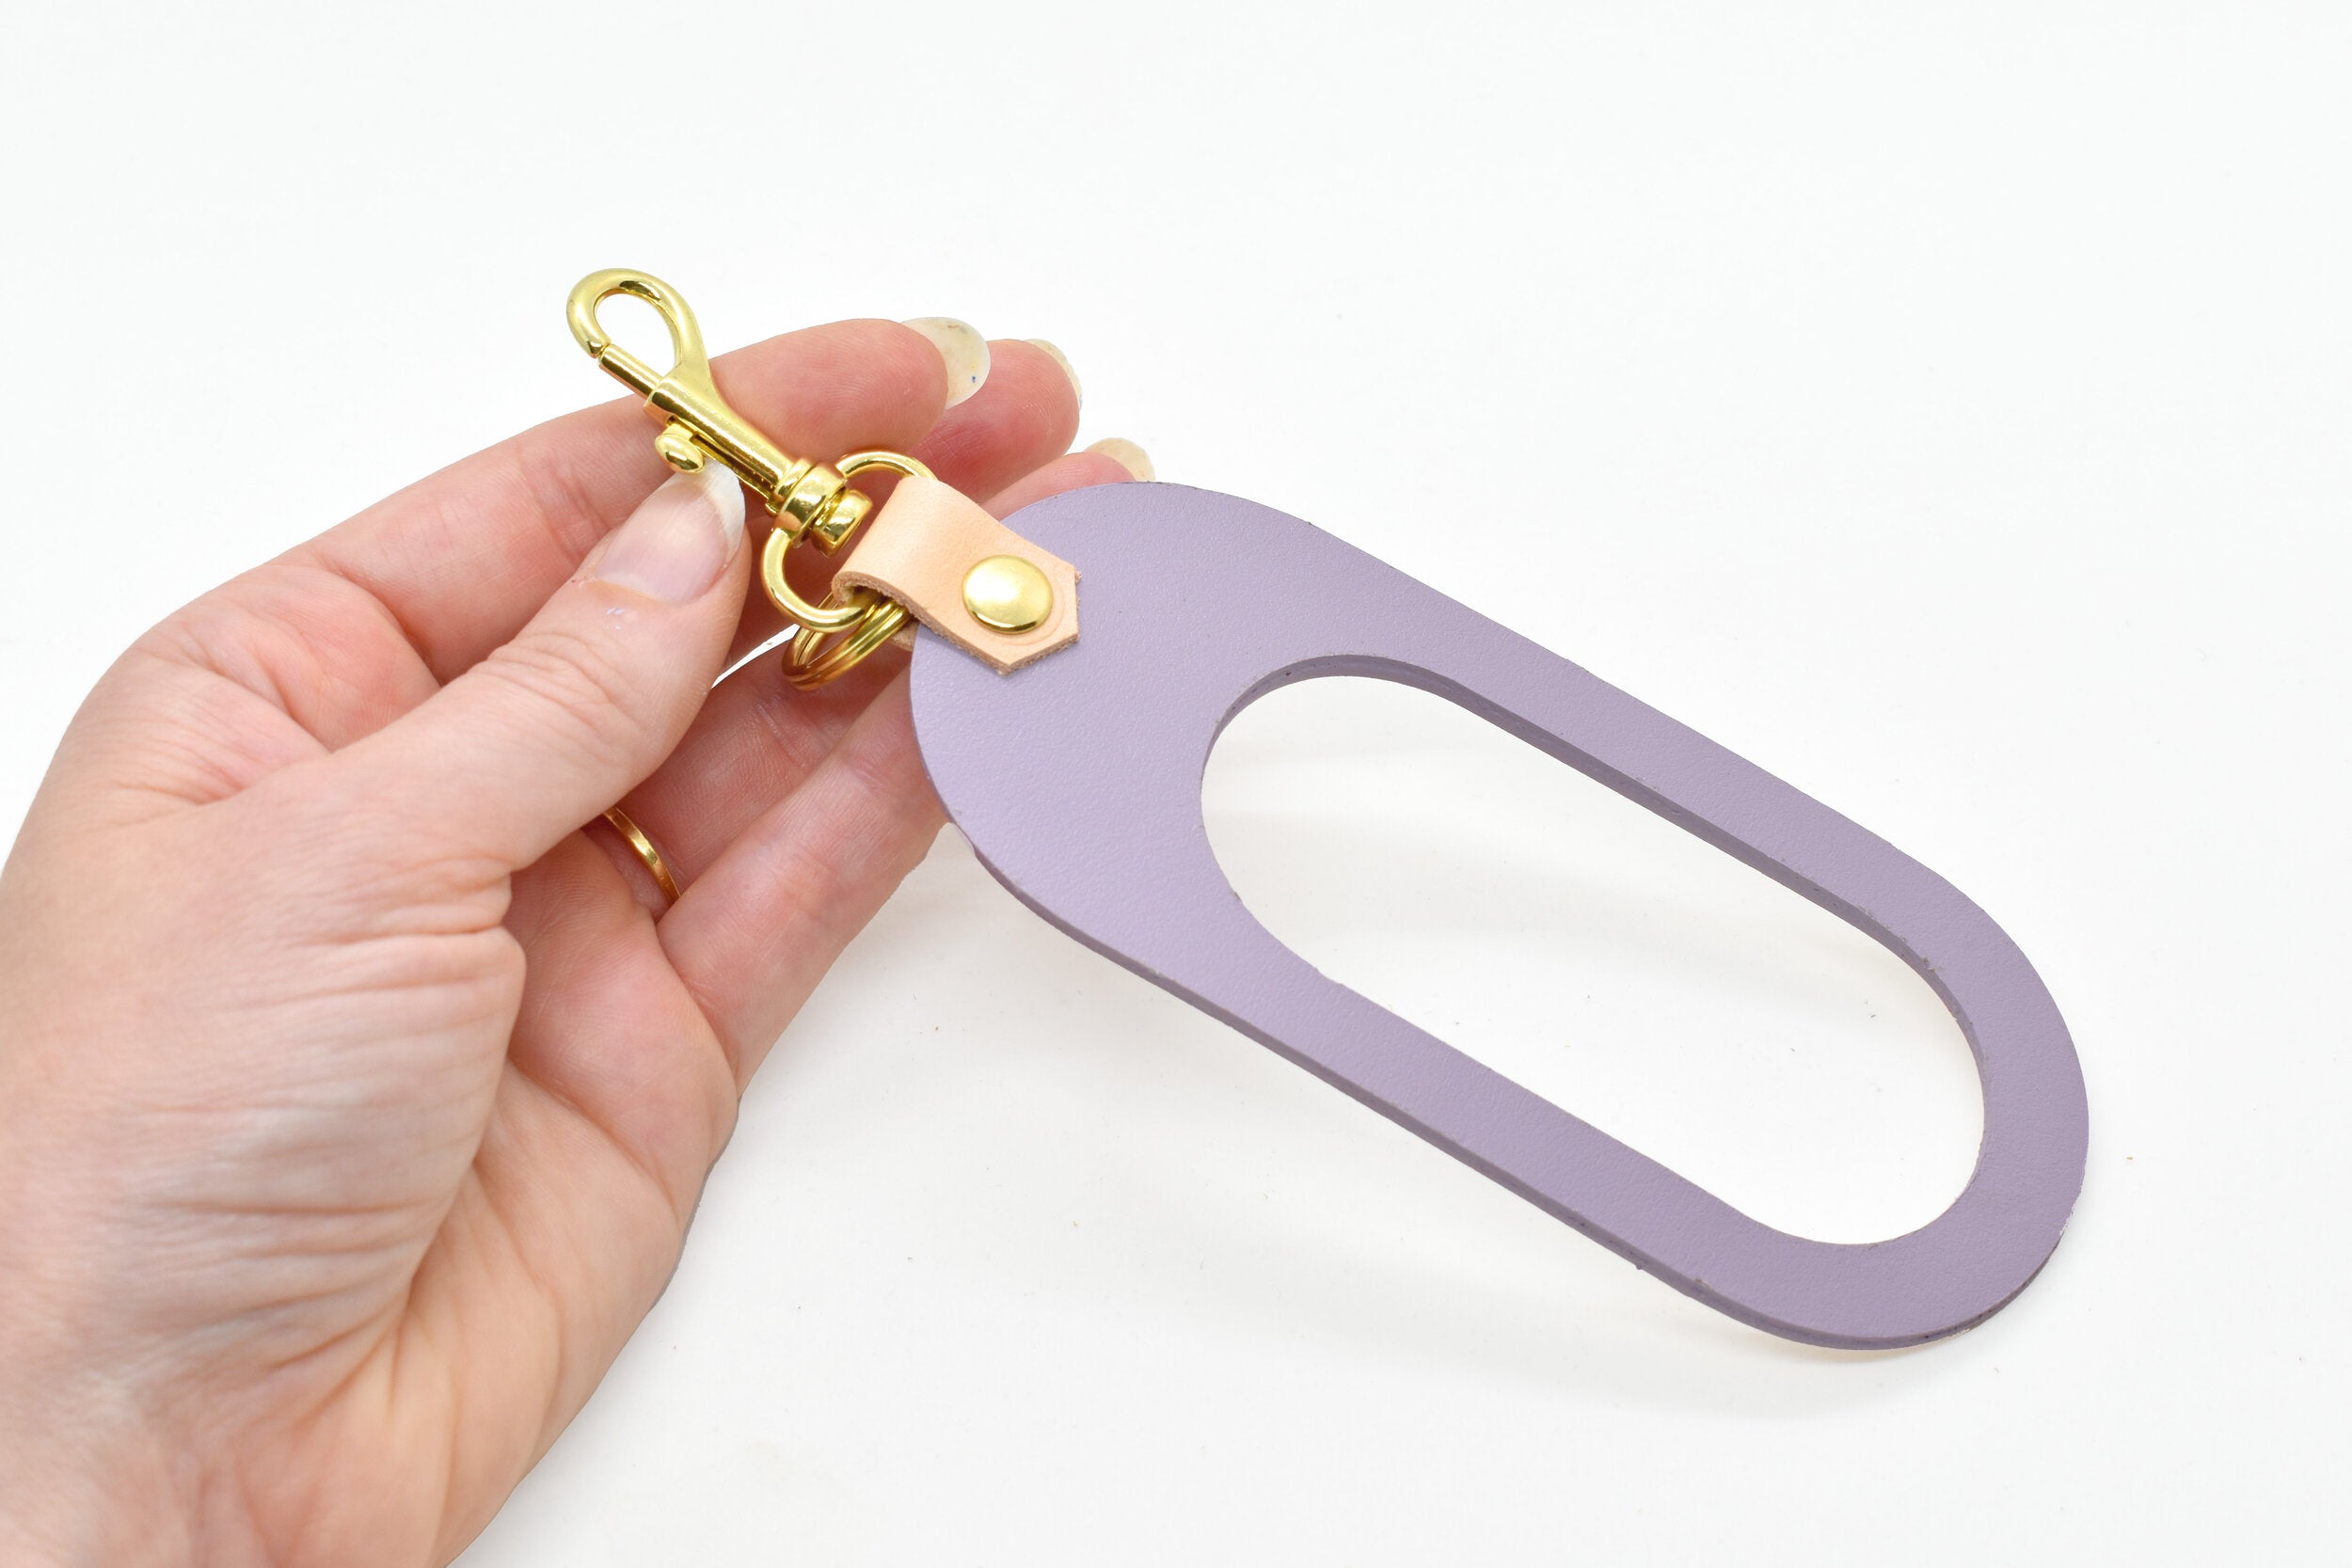 dual-colored leather cut out key chain hand strap with gold keyring and spring clasp in lavender and beige natural authentic leather